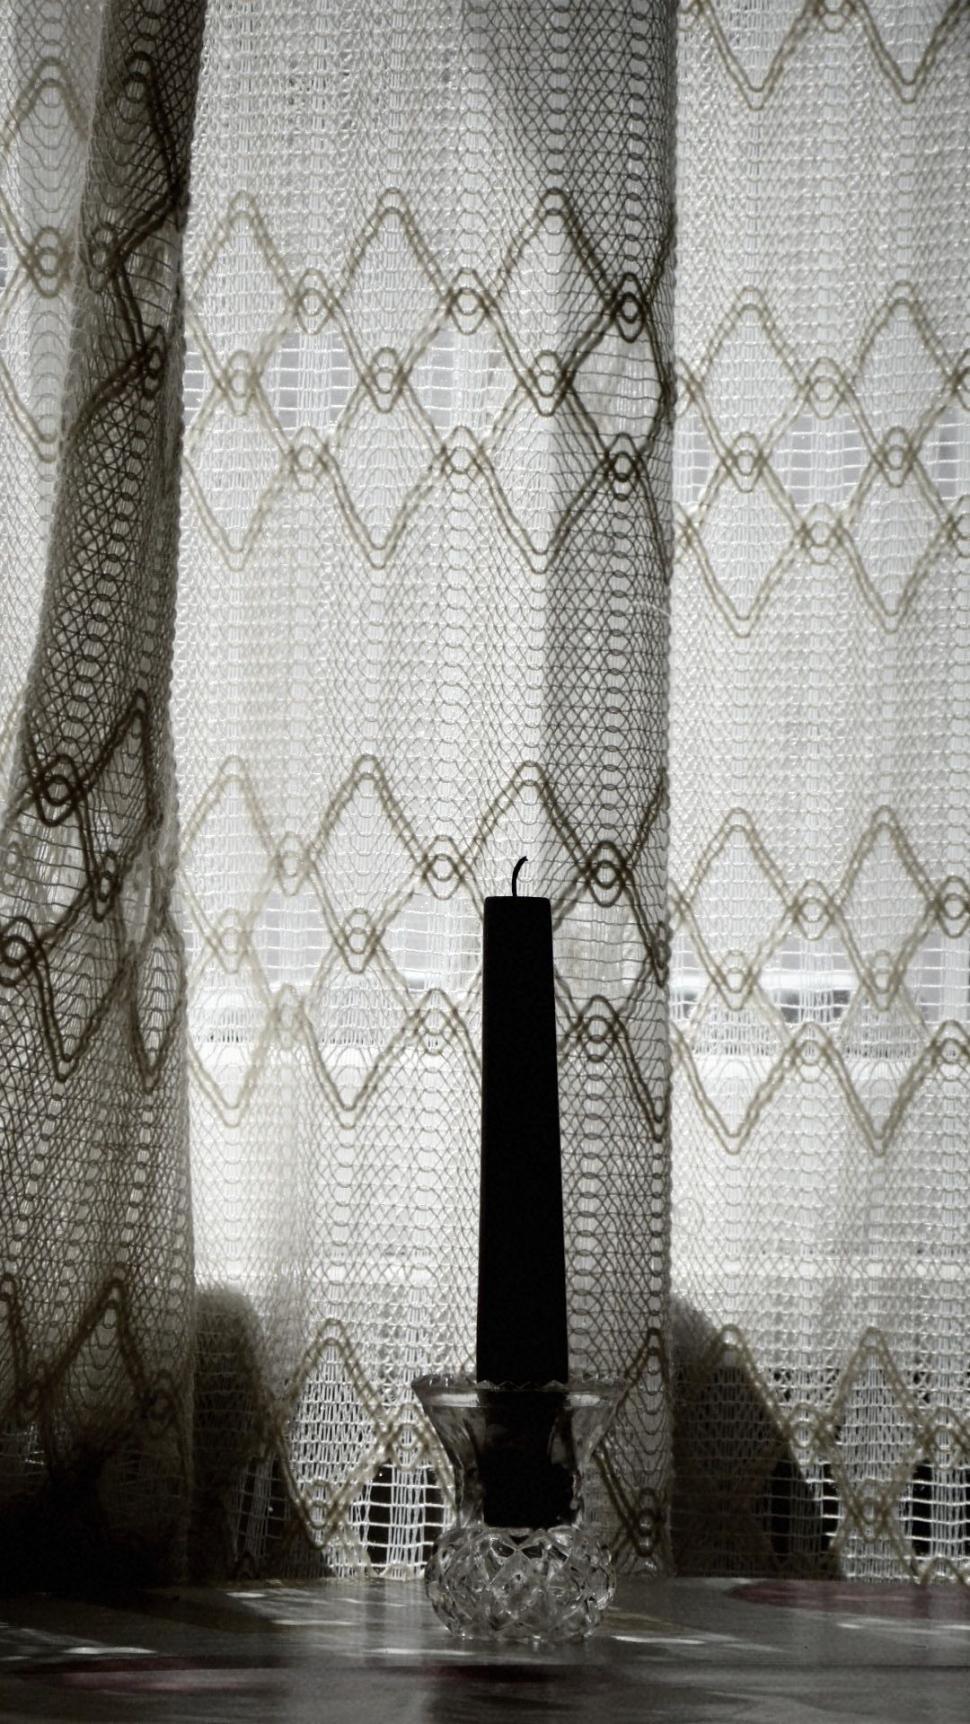 Free Image of Curtain and Candle  